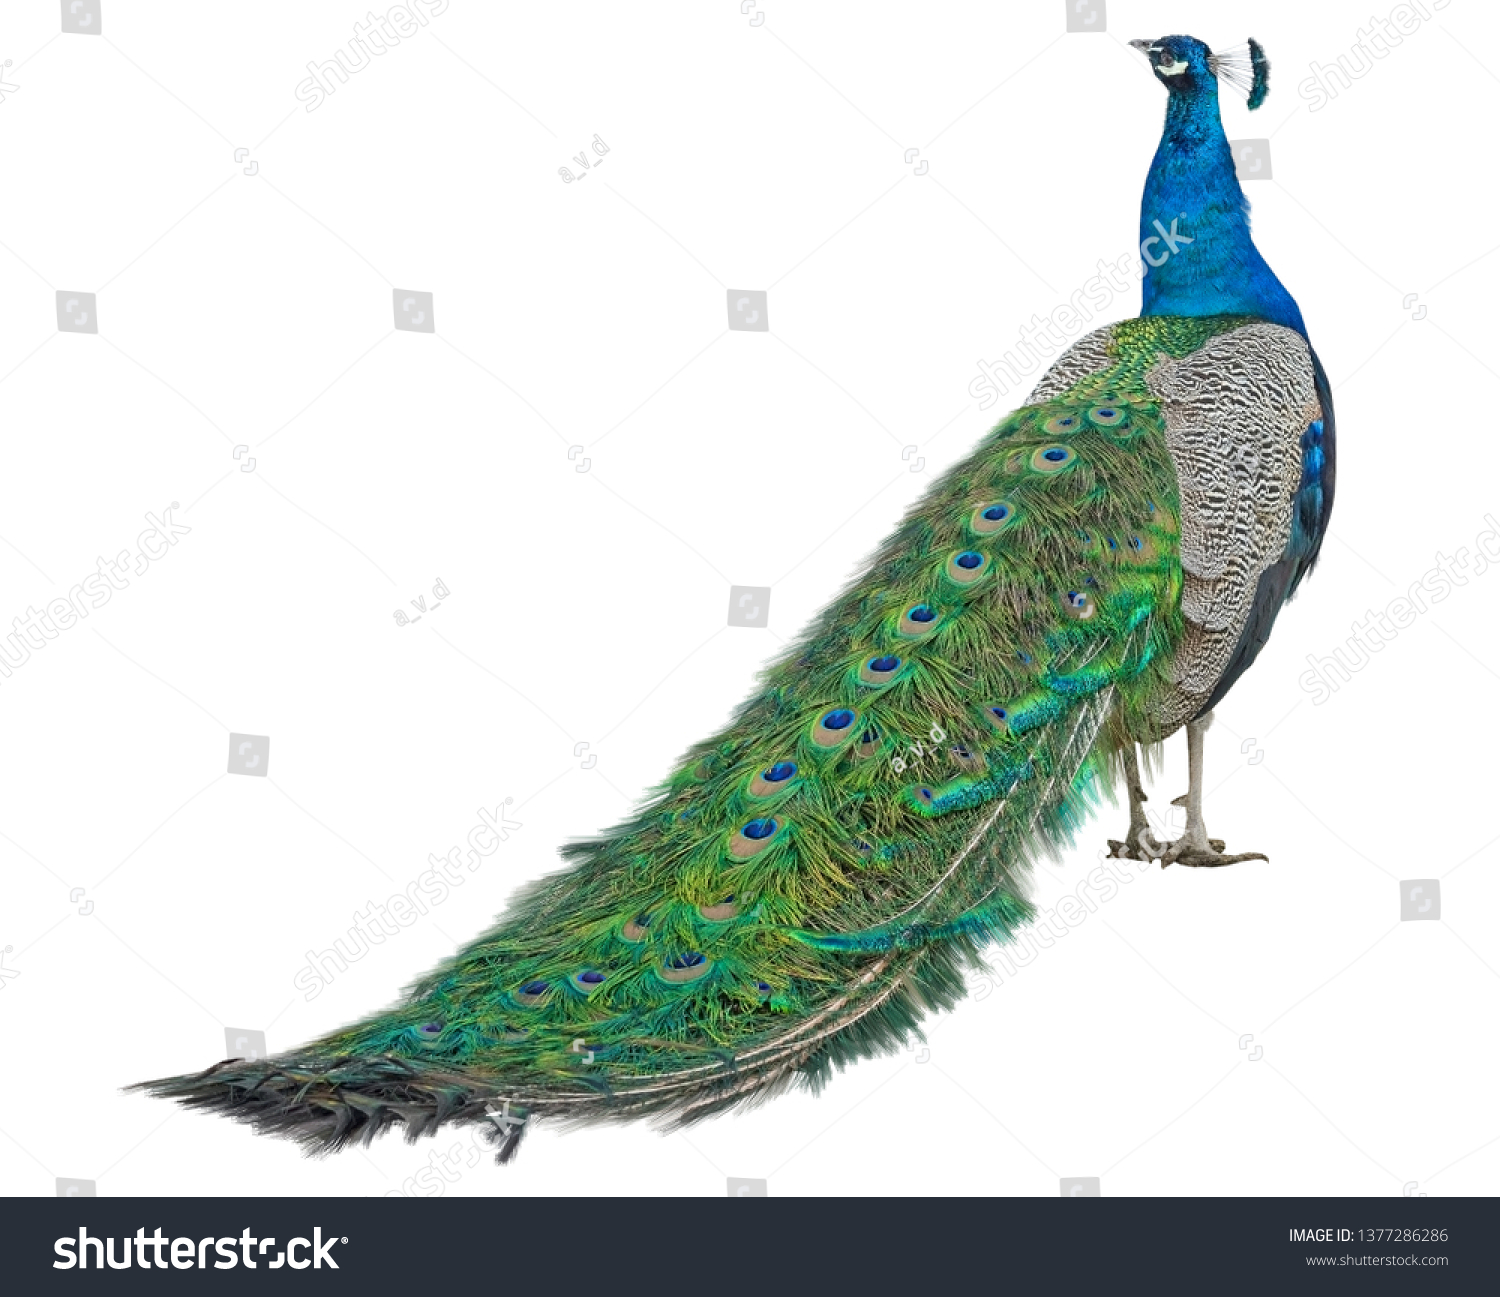 Beautiful Peacock Isolated On White Background #1377286286